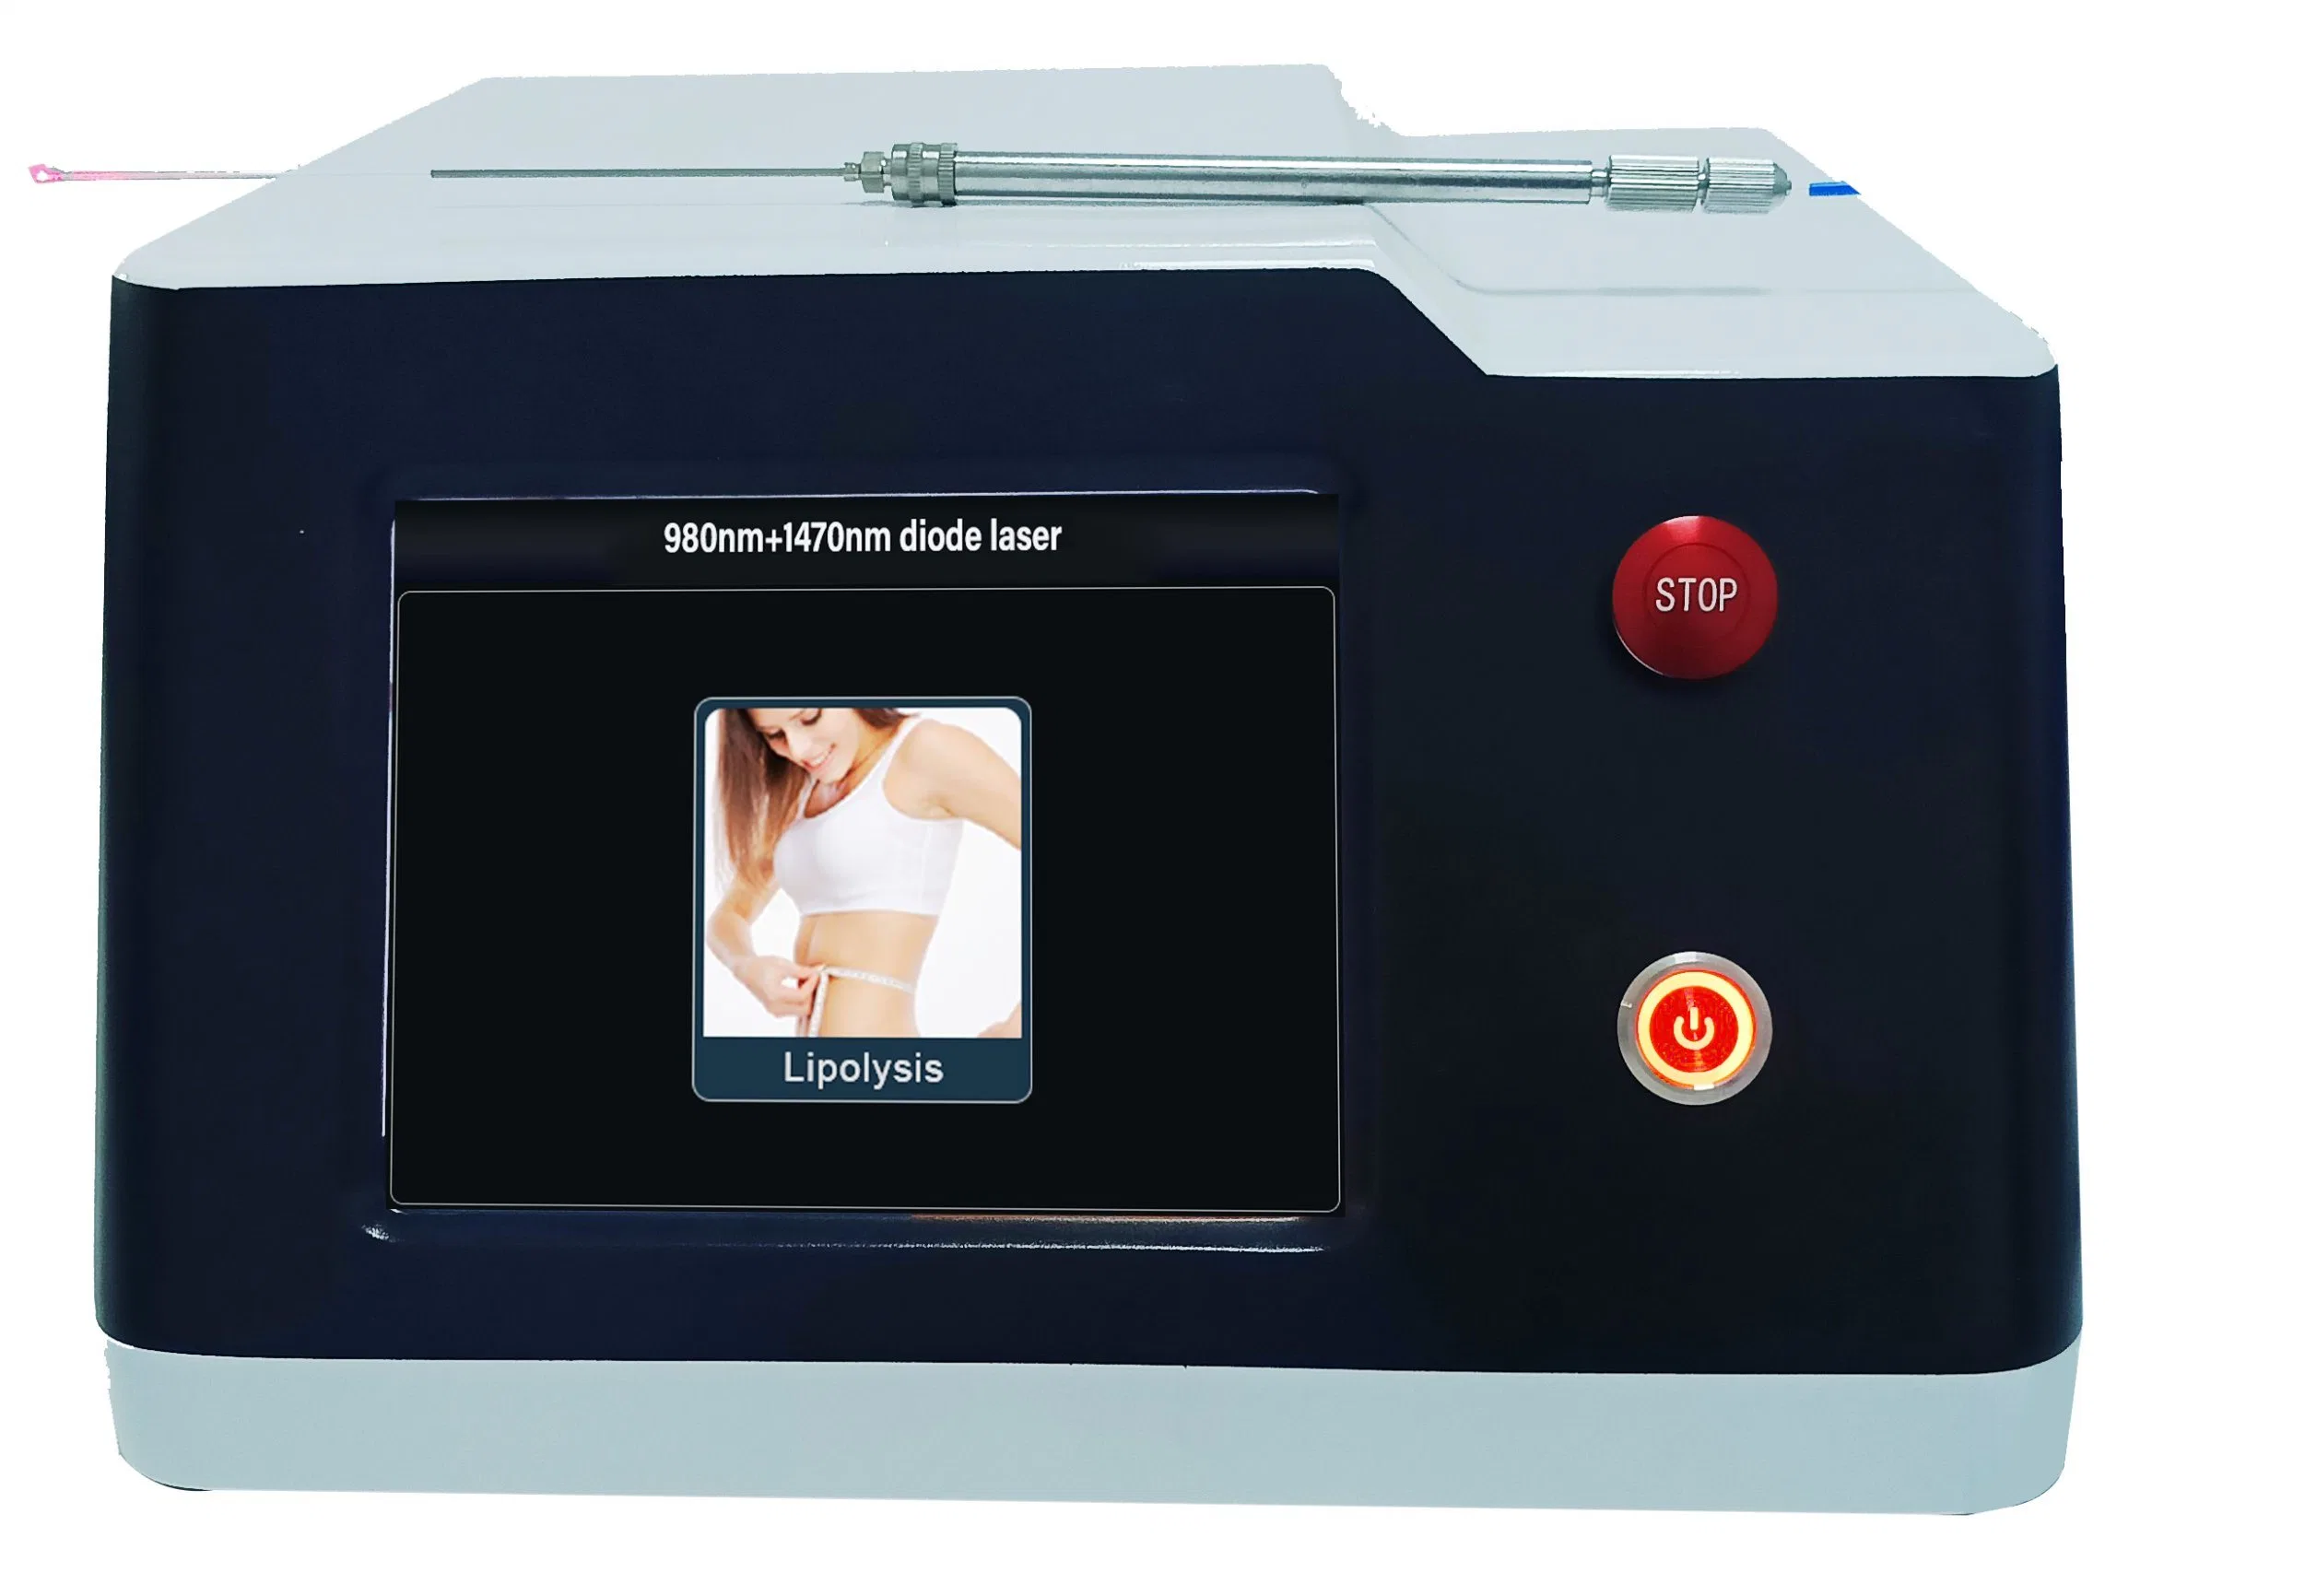 New Products Latest Technology Dental Diode Laser 980 1470 Nm Diode Laser Physiotherapy Equipment 1470nm Medical 980 1470 Fiber Laser Diodo Laser Liposuction